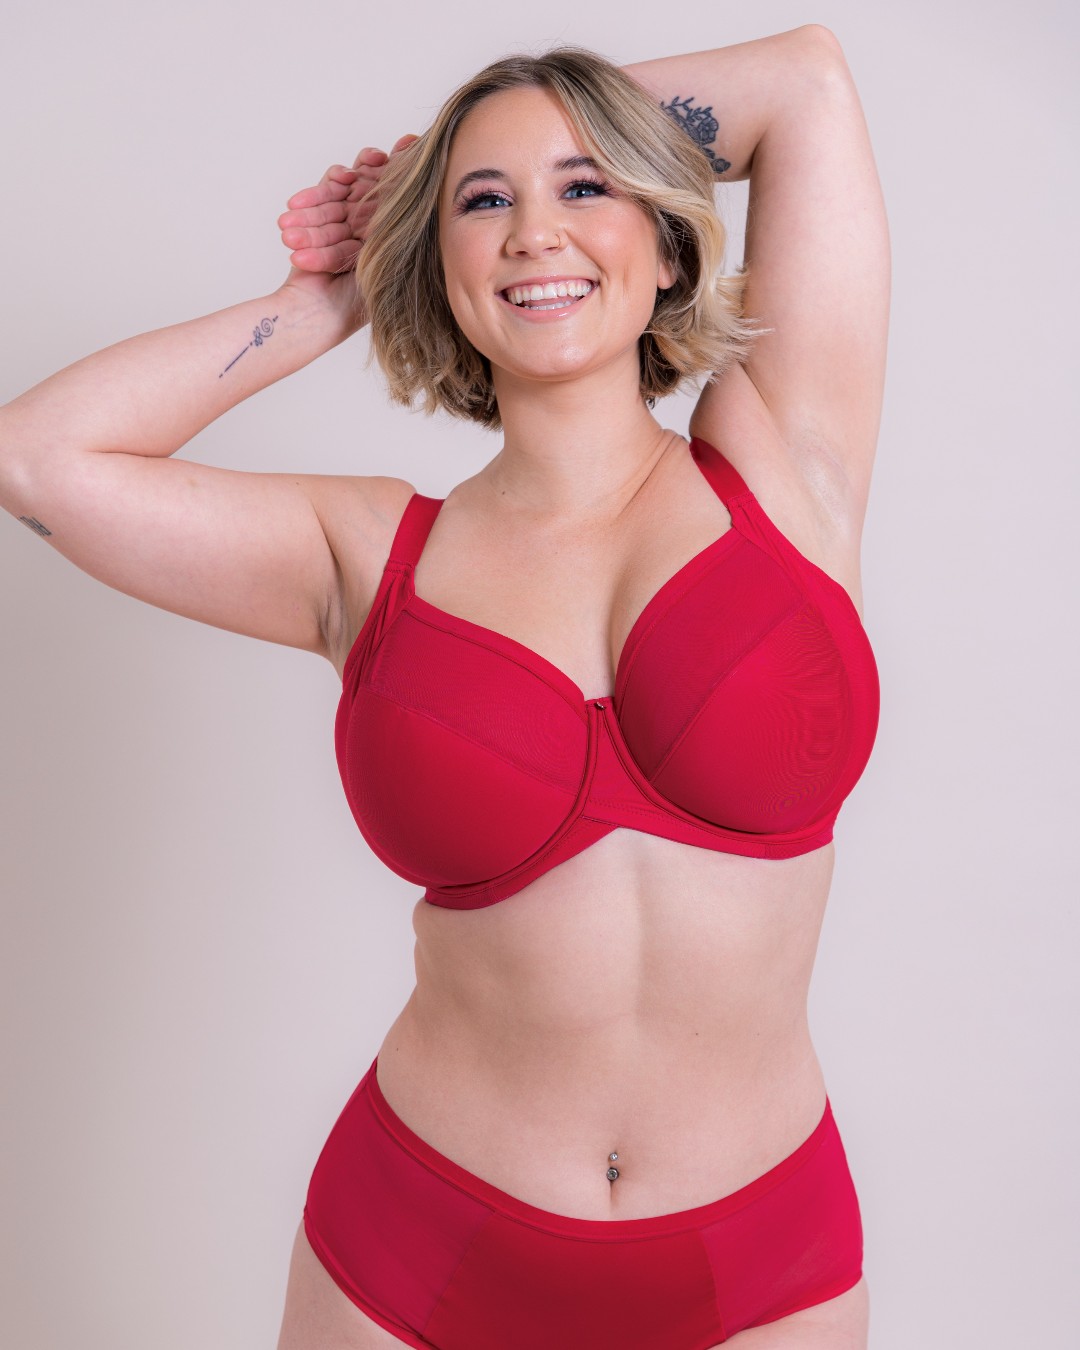 Curvy Kate  D-K Cup on X: Get ready for the heat, freshen up